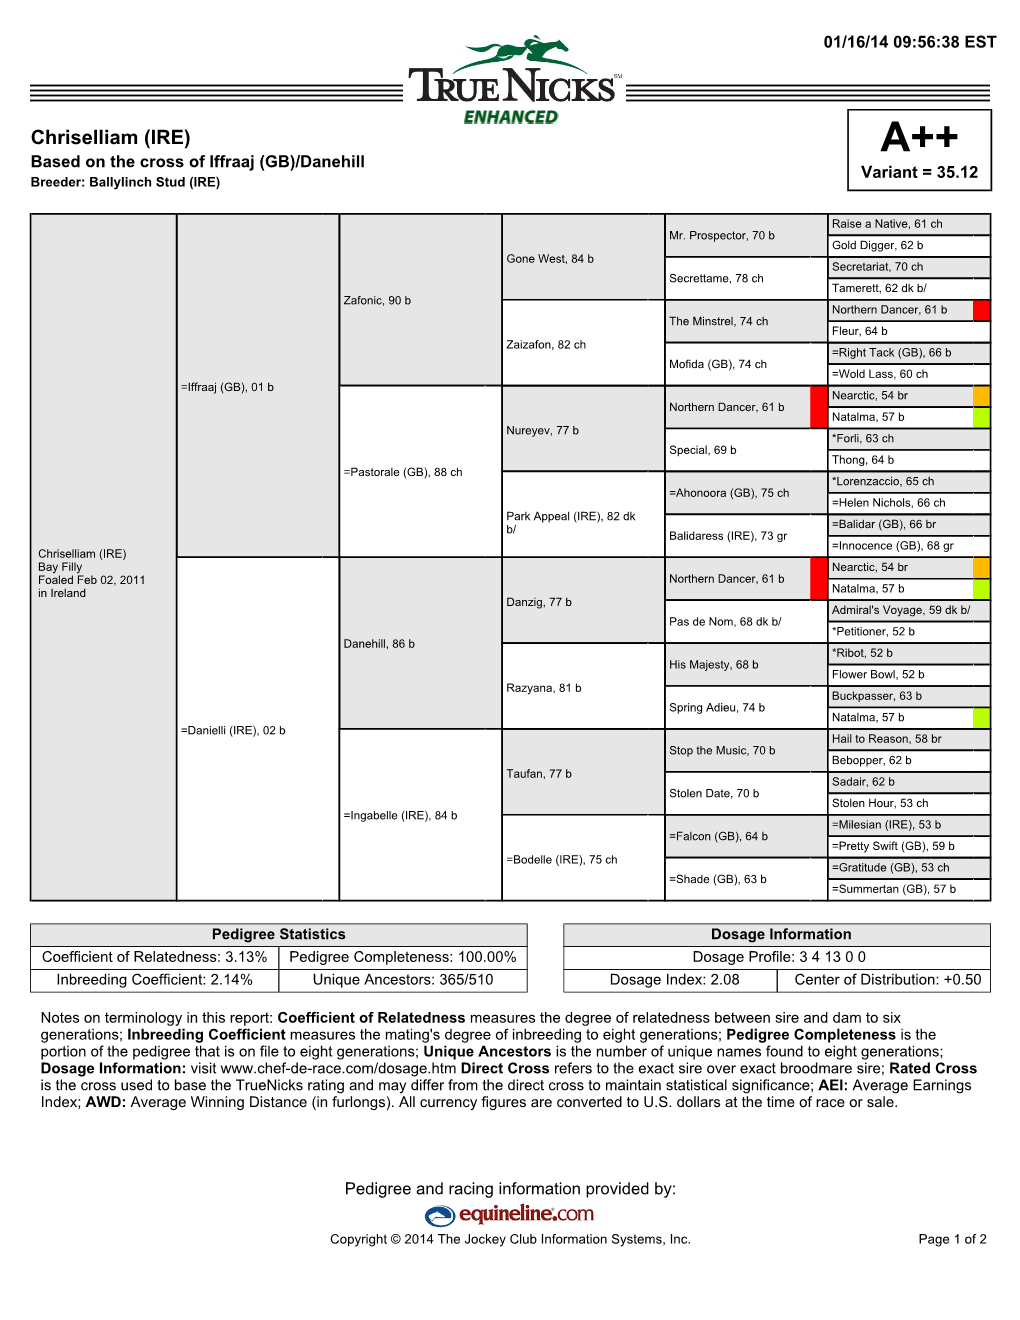 Chriselliam (IRE) A++ Based on the Cross of Iffraaj (GB)/Danehill Variant = 35.12 Breeder: Ballylinch Stud (IRE)